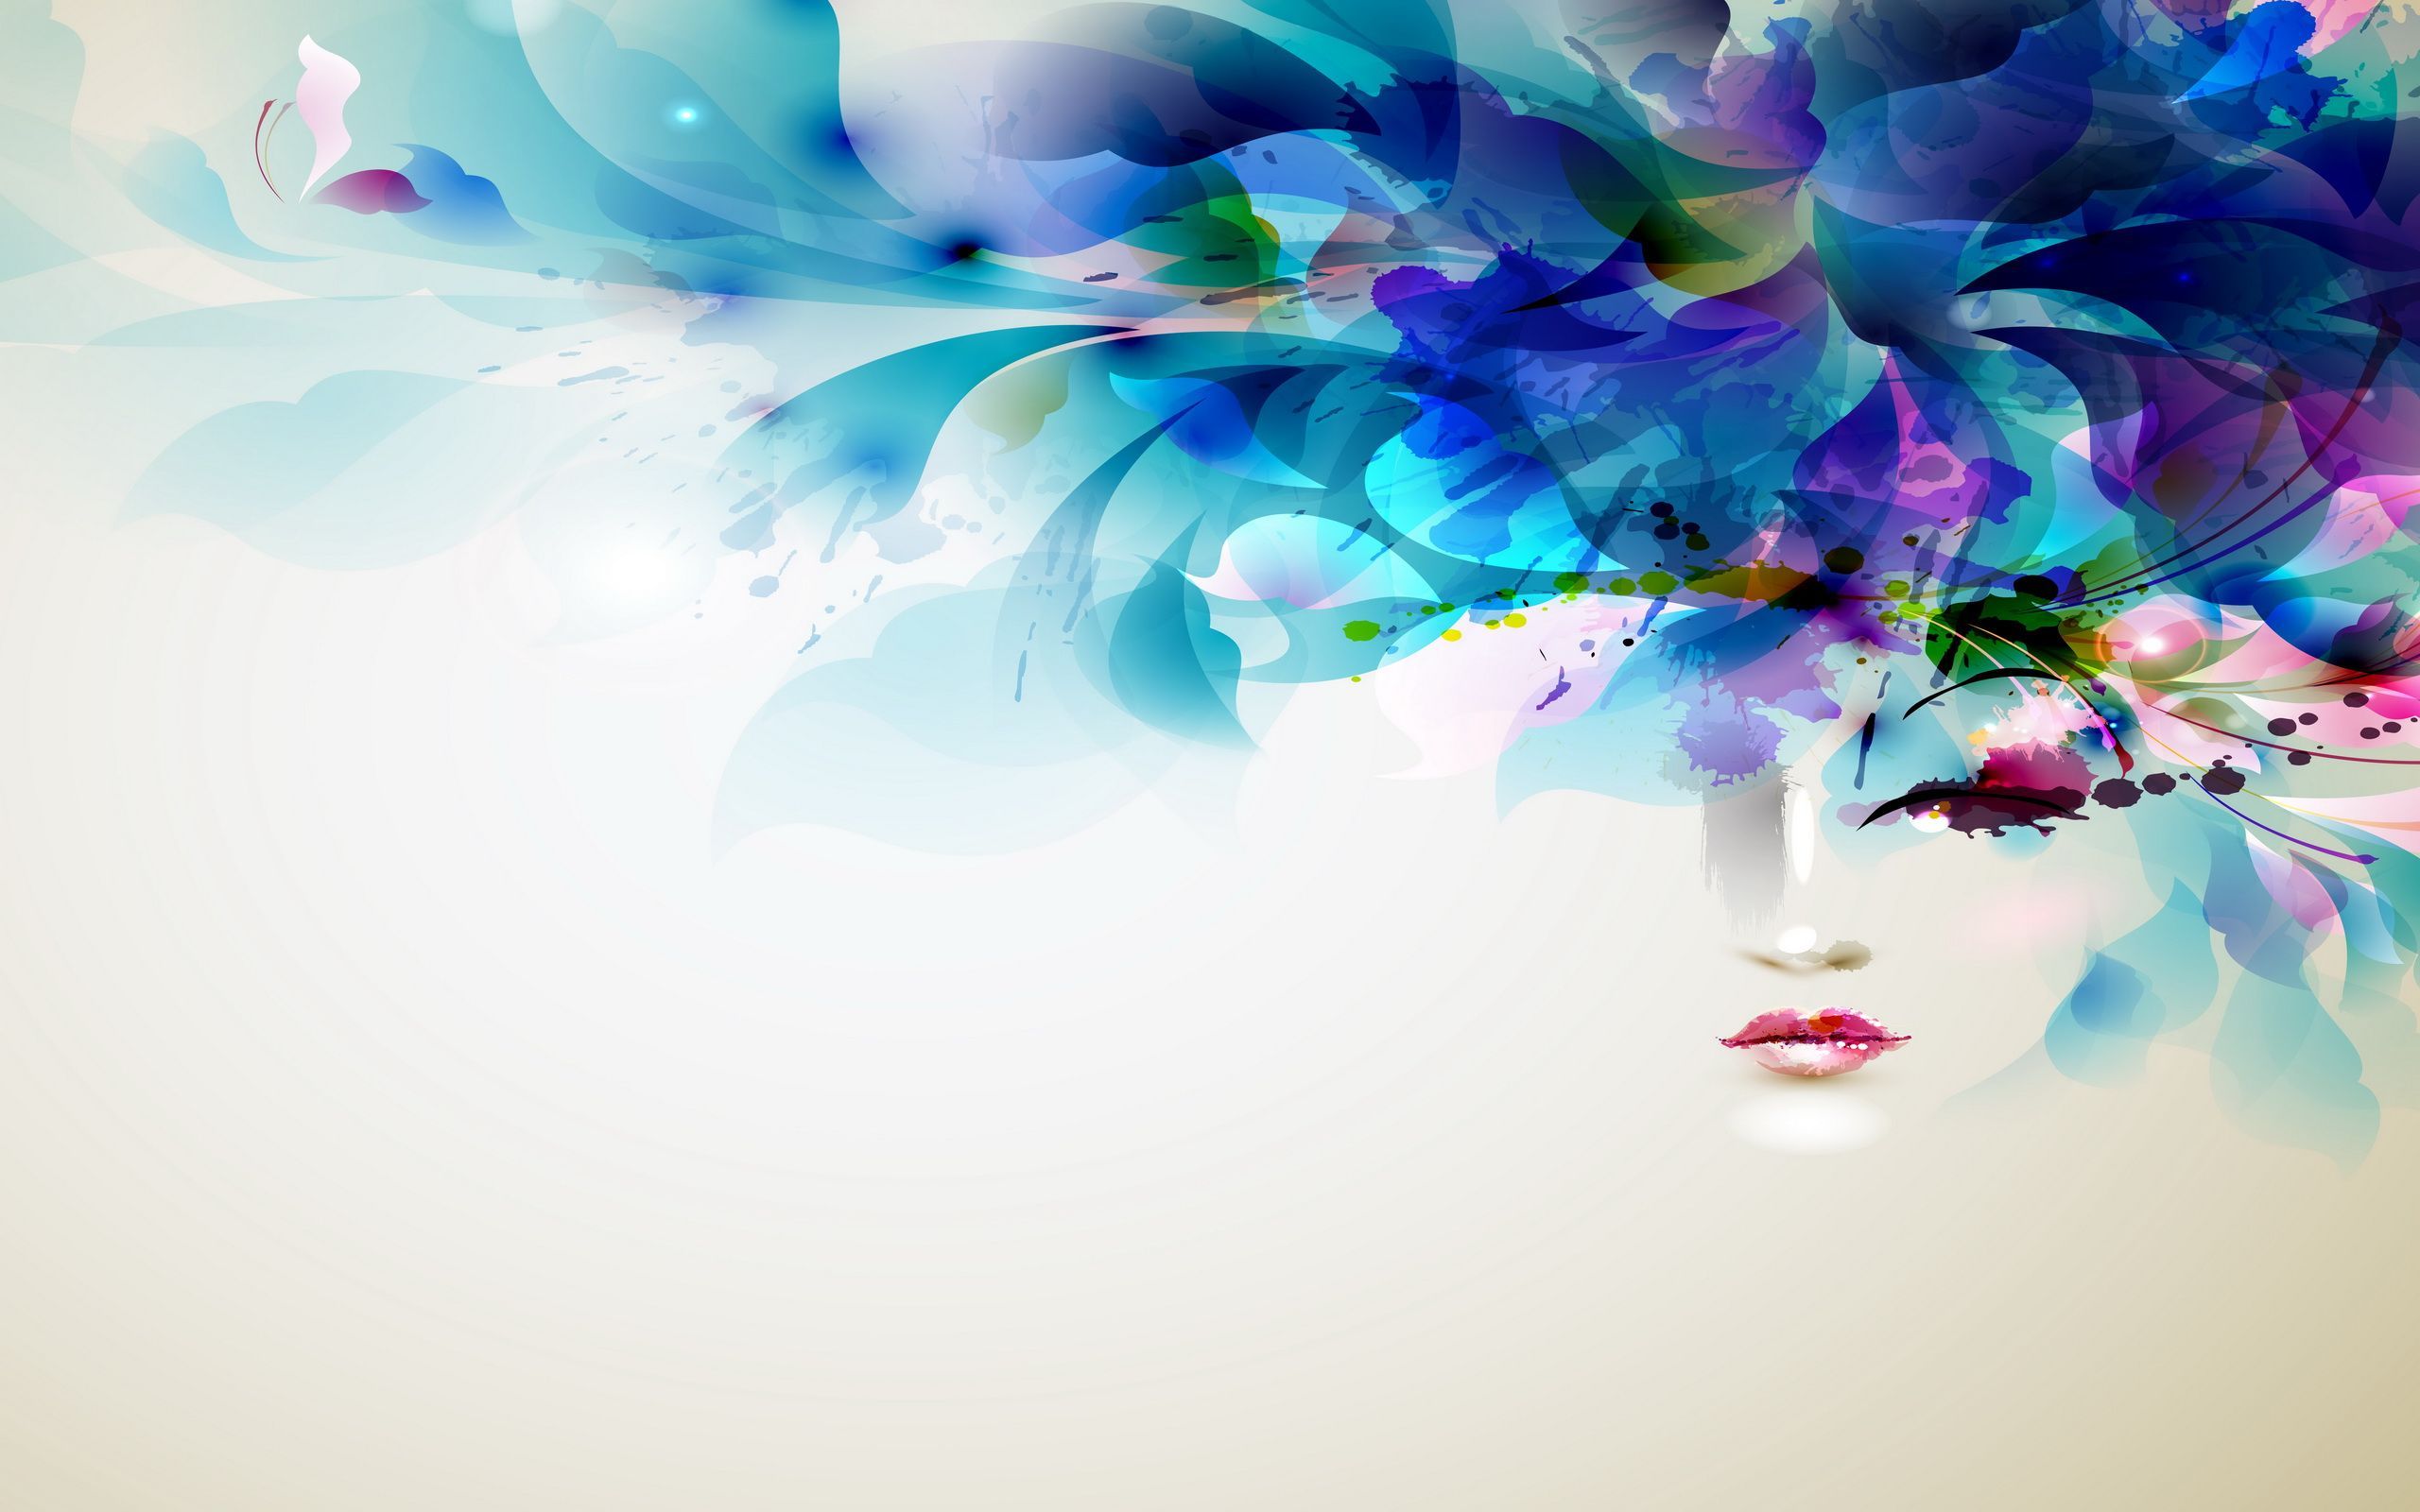 Women and Flowers Abstract Wallpaper Free Women and Flowers